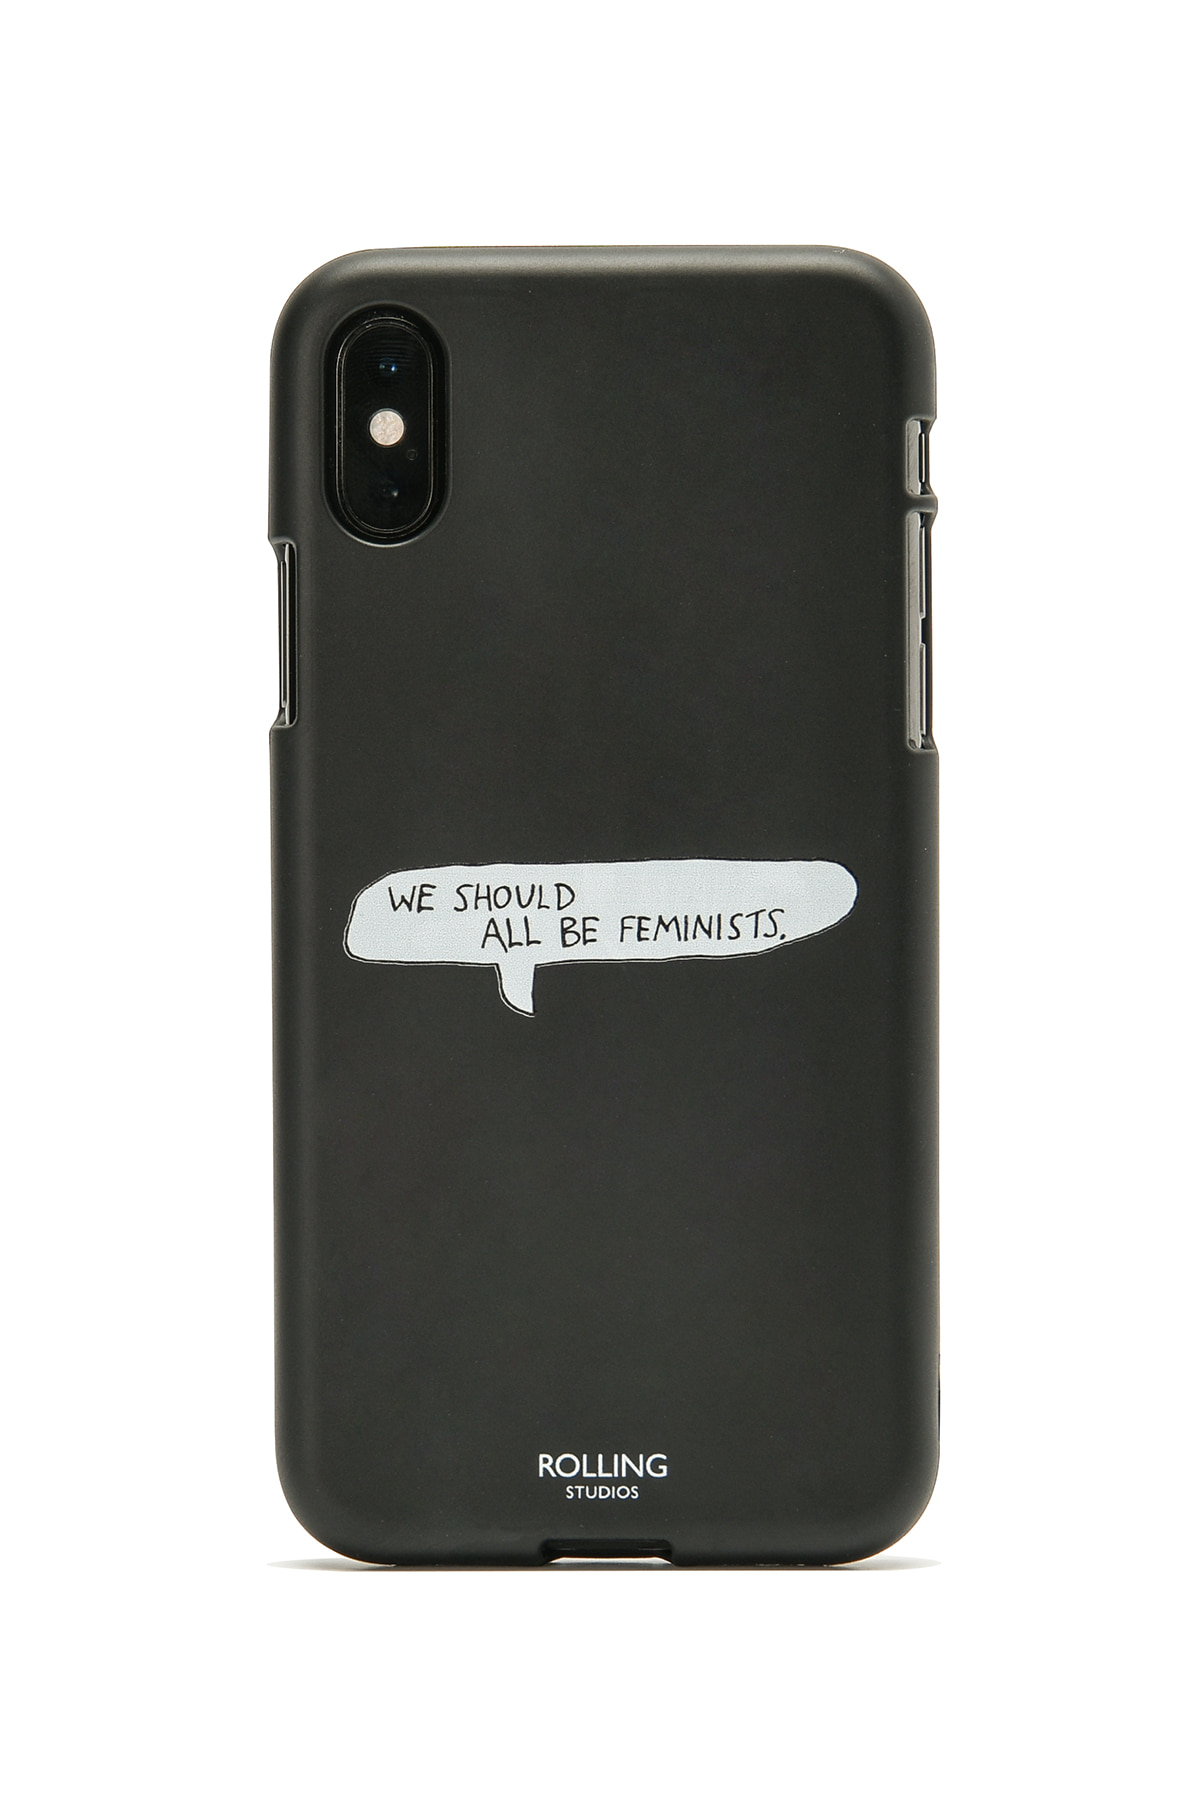 &quot;WE SHOULD ALL BE FEMINISTS&quot; Printed iPhone Case Black